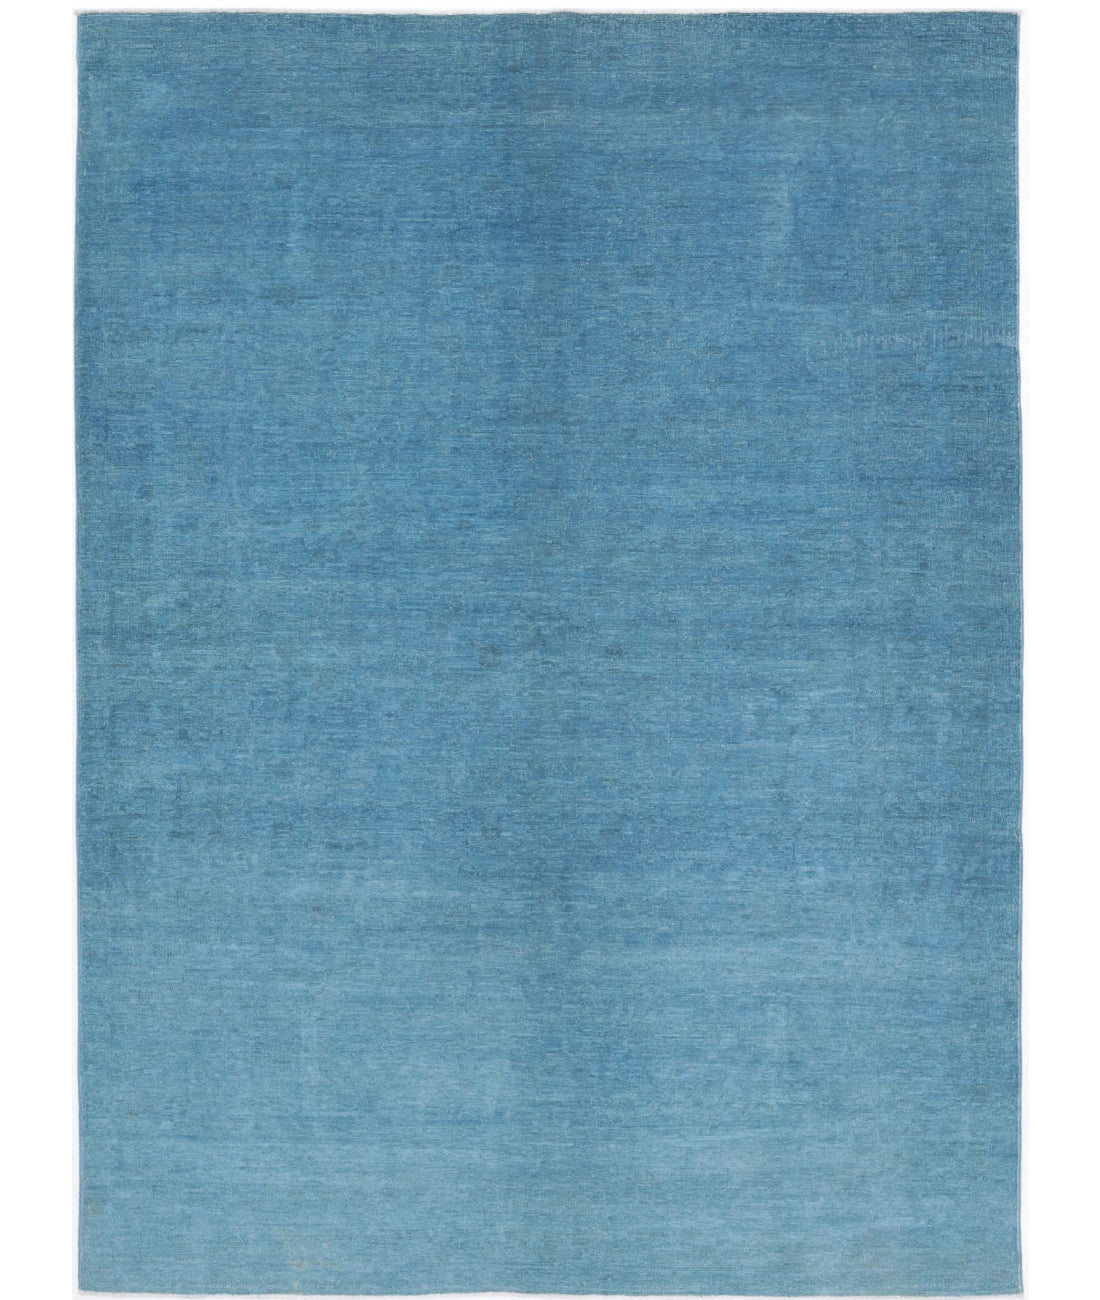 Hand Knotted Overdye Wool Rug - 5'11'' x 8'3'' 5'11'' x 8'3'' (178 X 248) / Blue / N/A